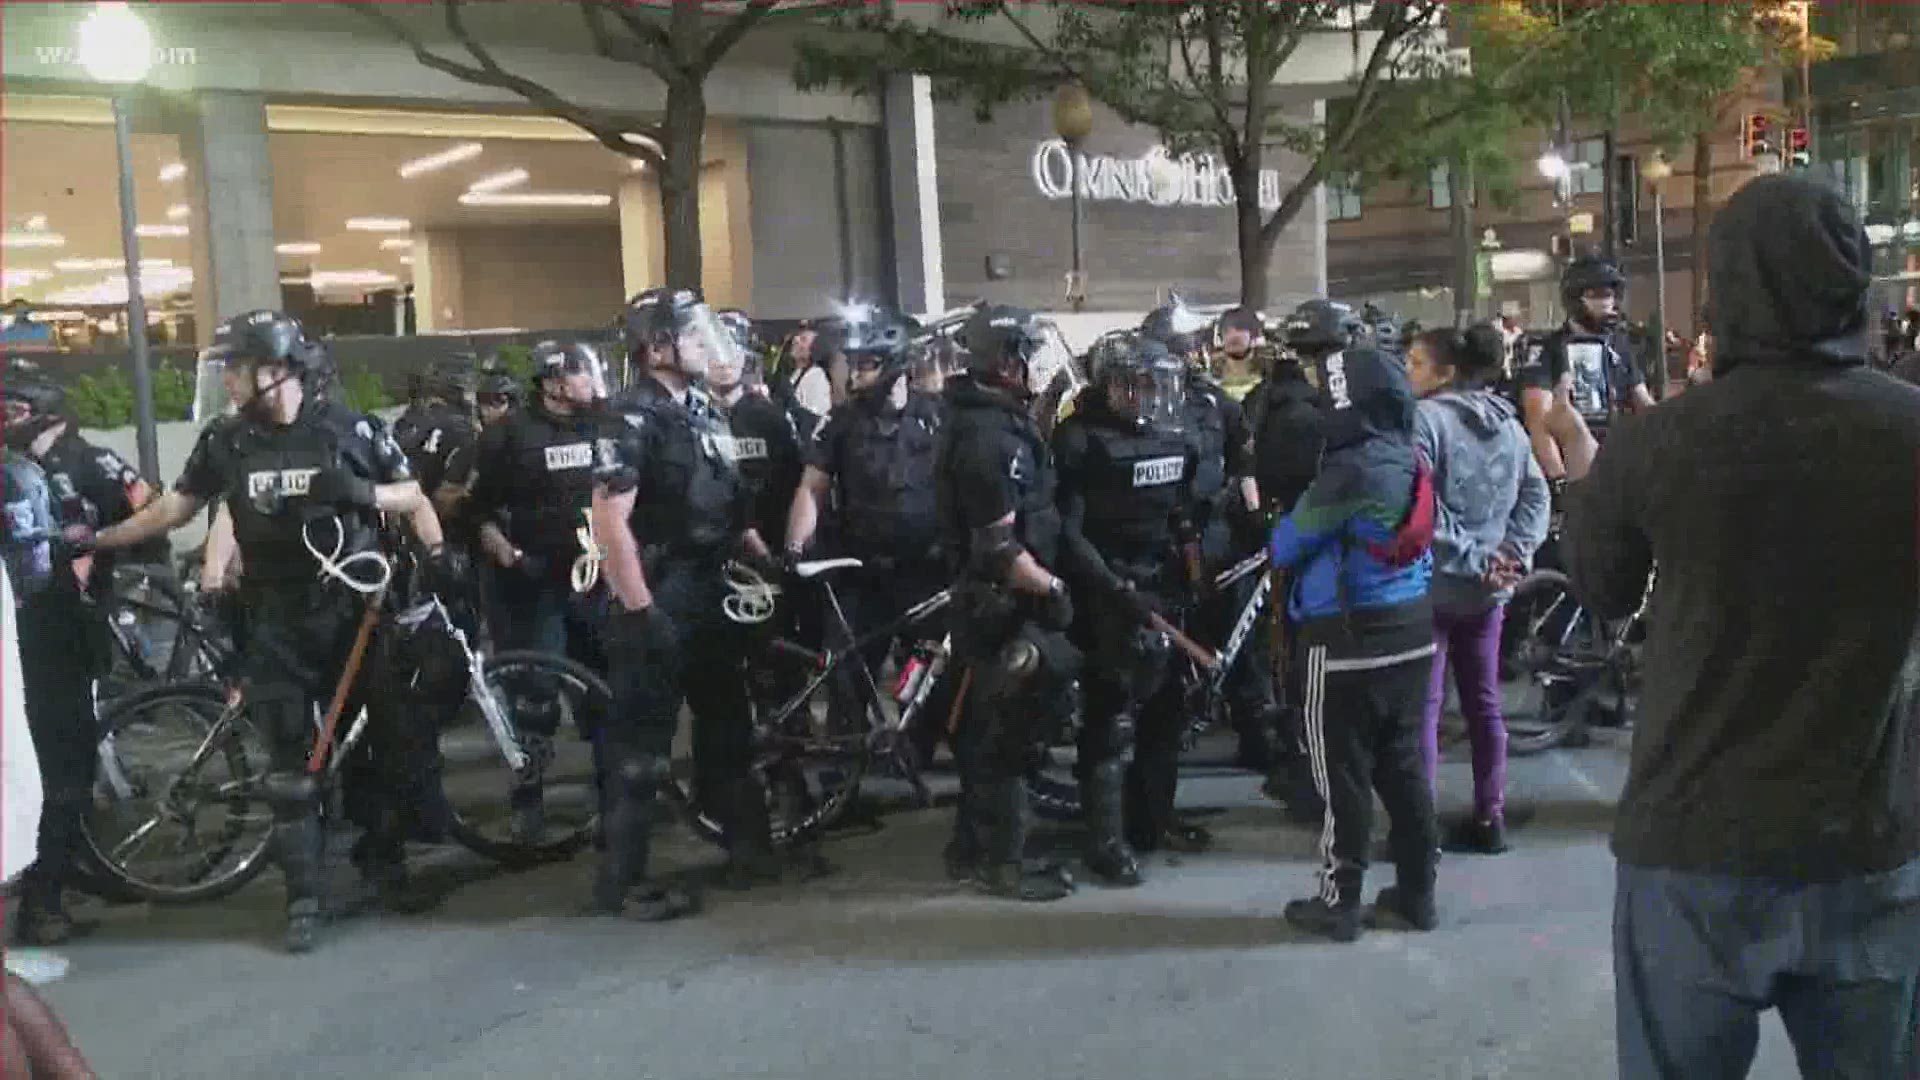 It's not known at this time why the woman was taken into custody at the Sunday protests in uptown Charlotte.